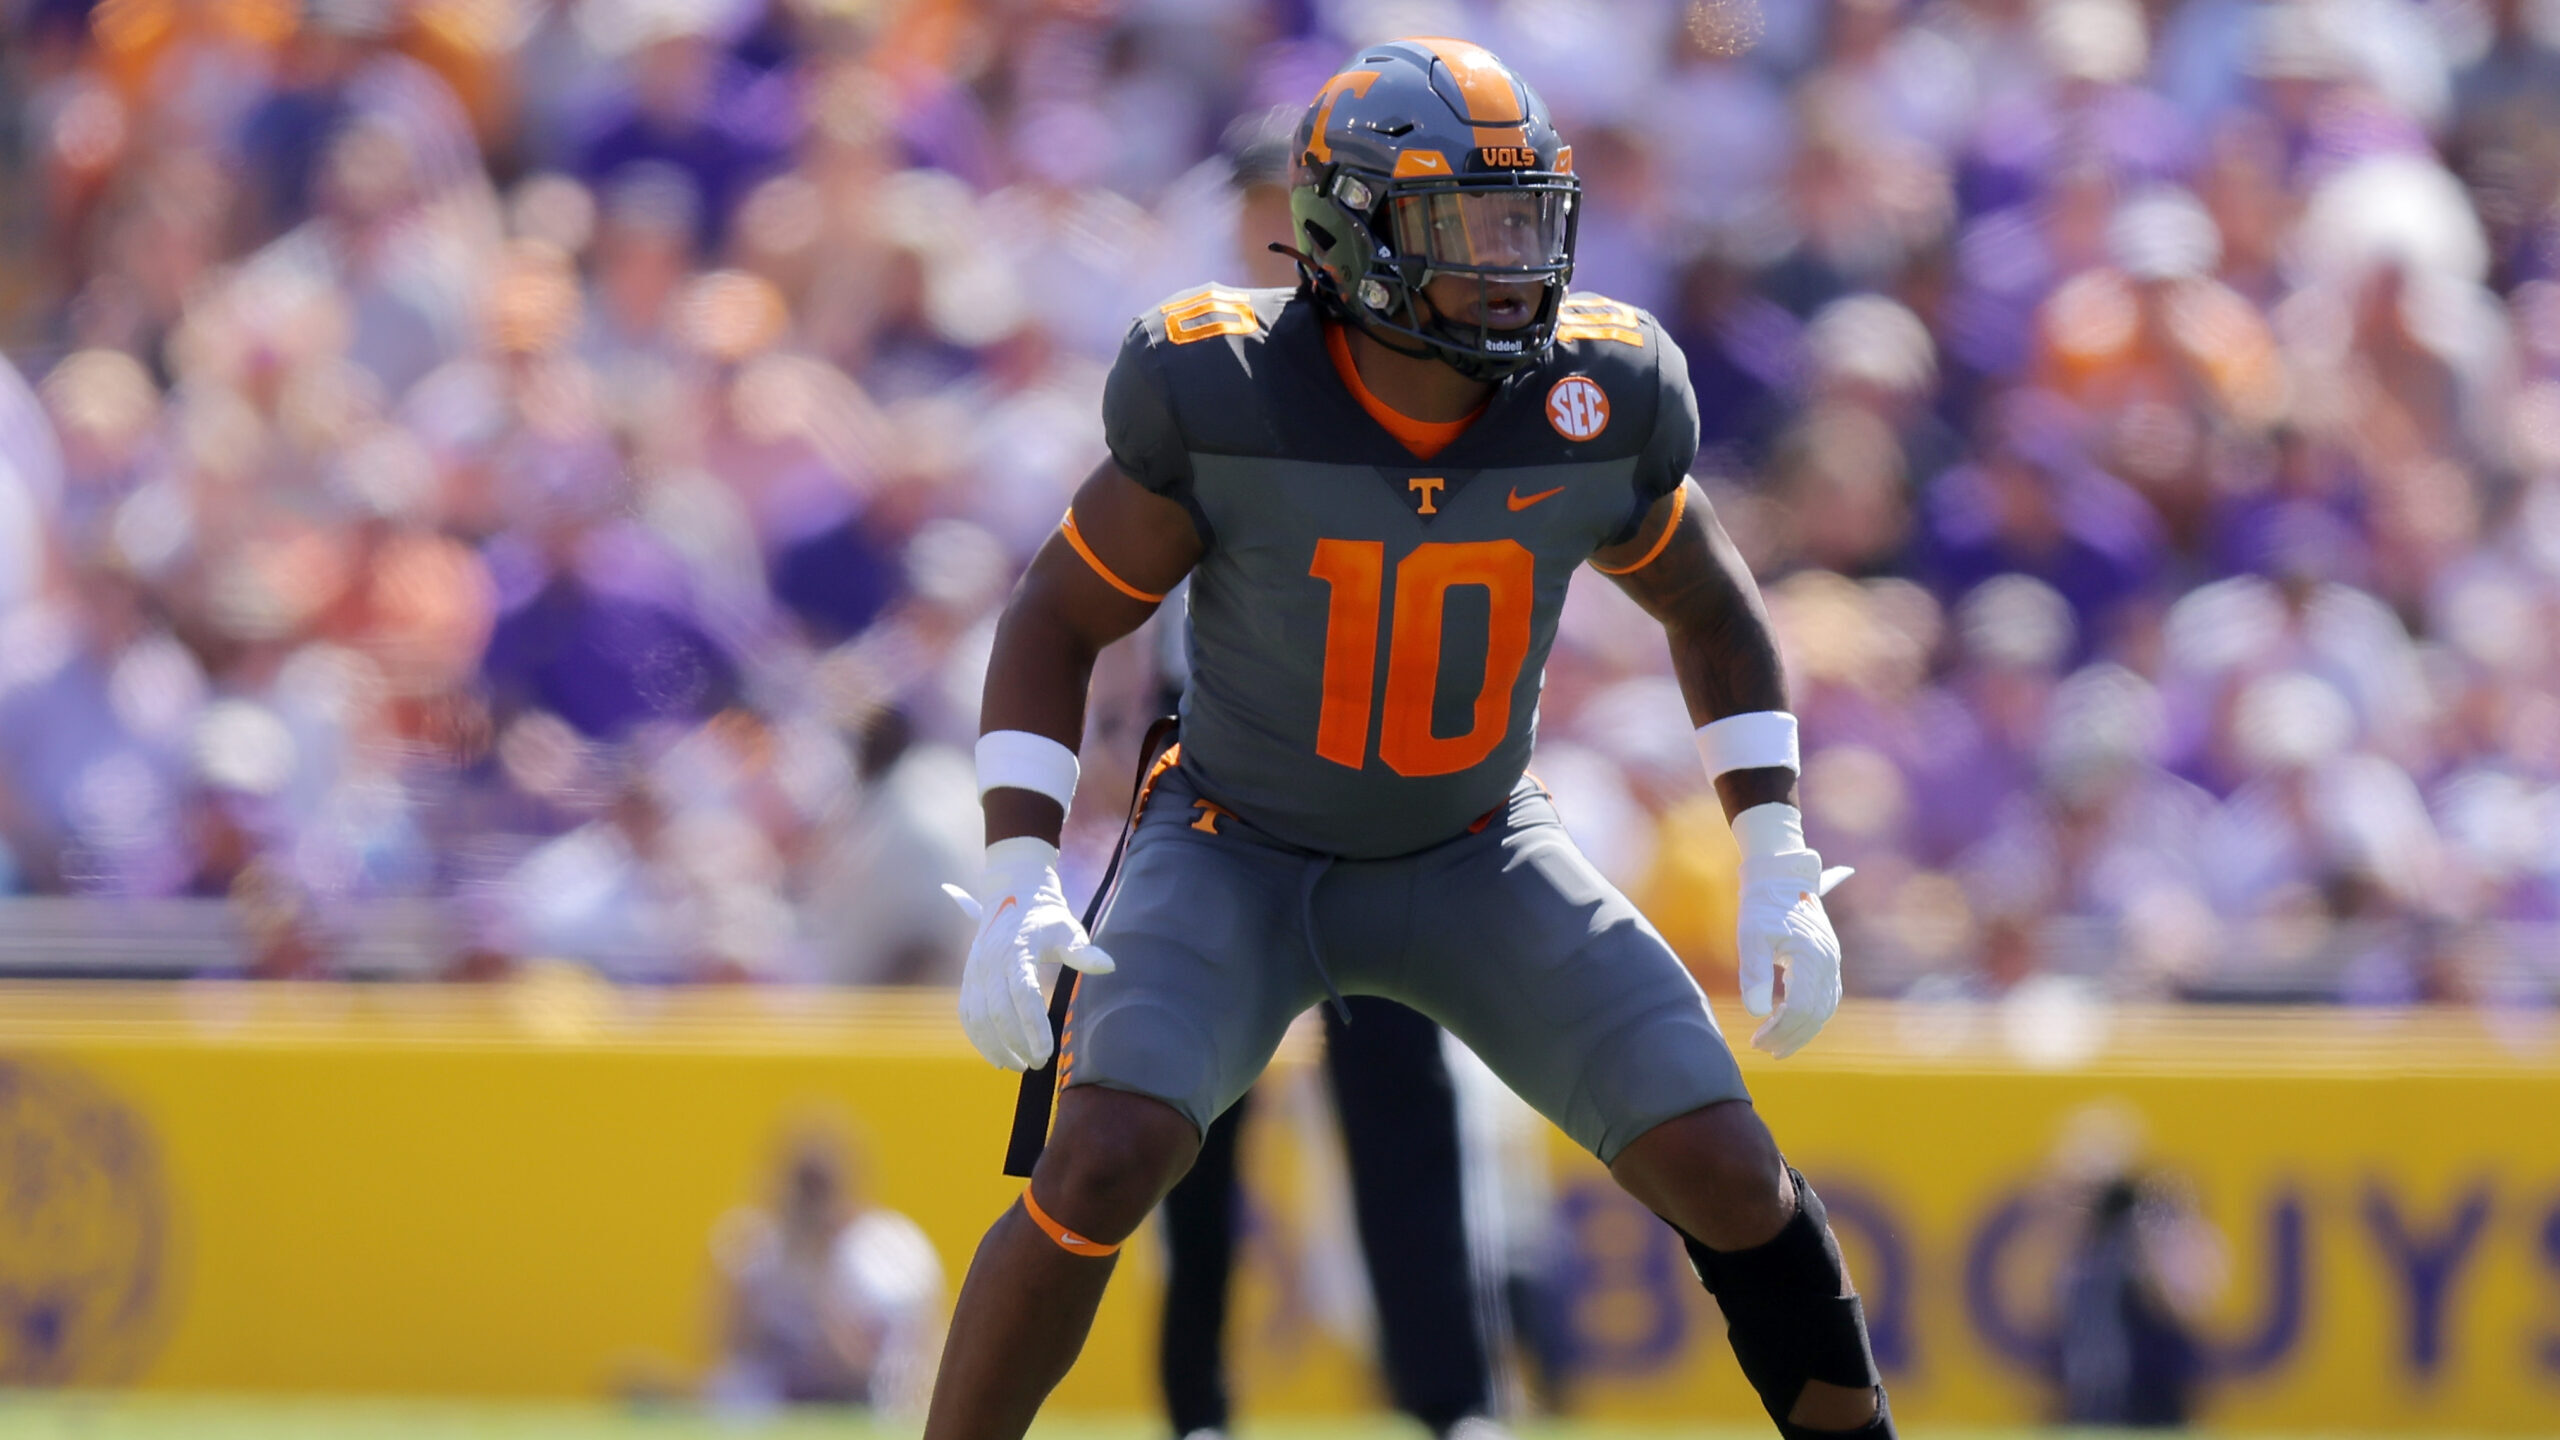 Juwan Mitchell #10 of the Tennessee Volunteers in action against the LSU Tigers during a game at Ti...